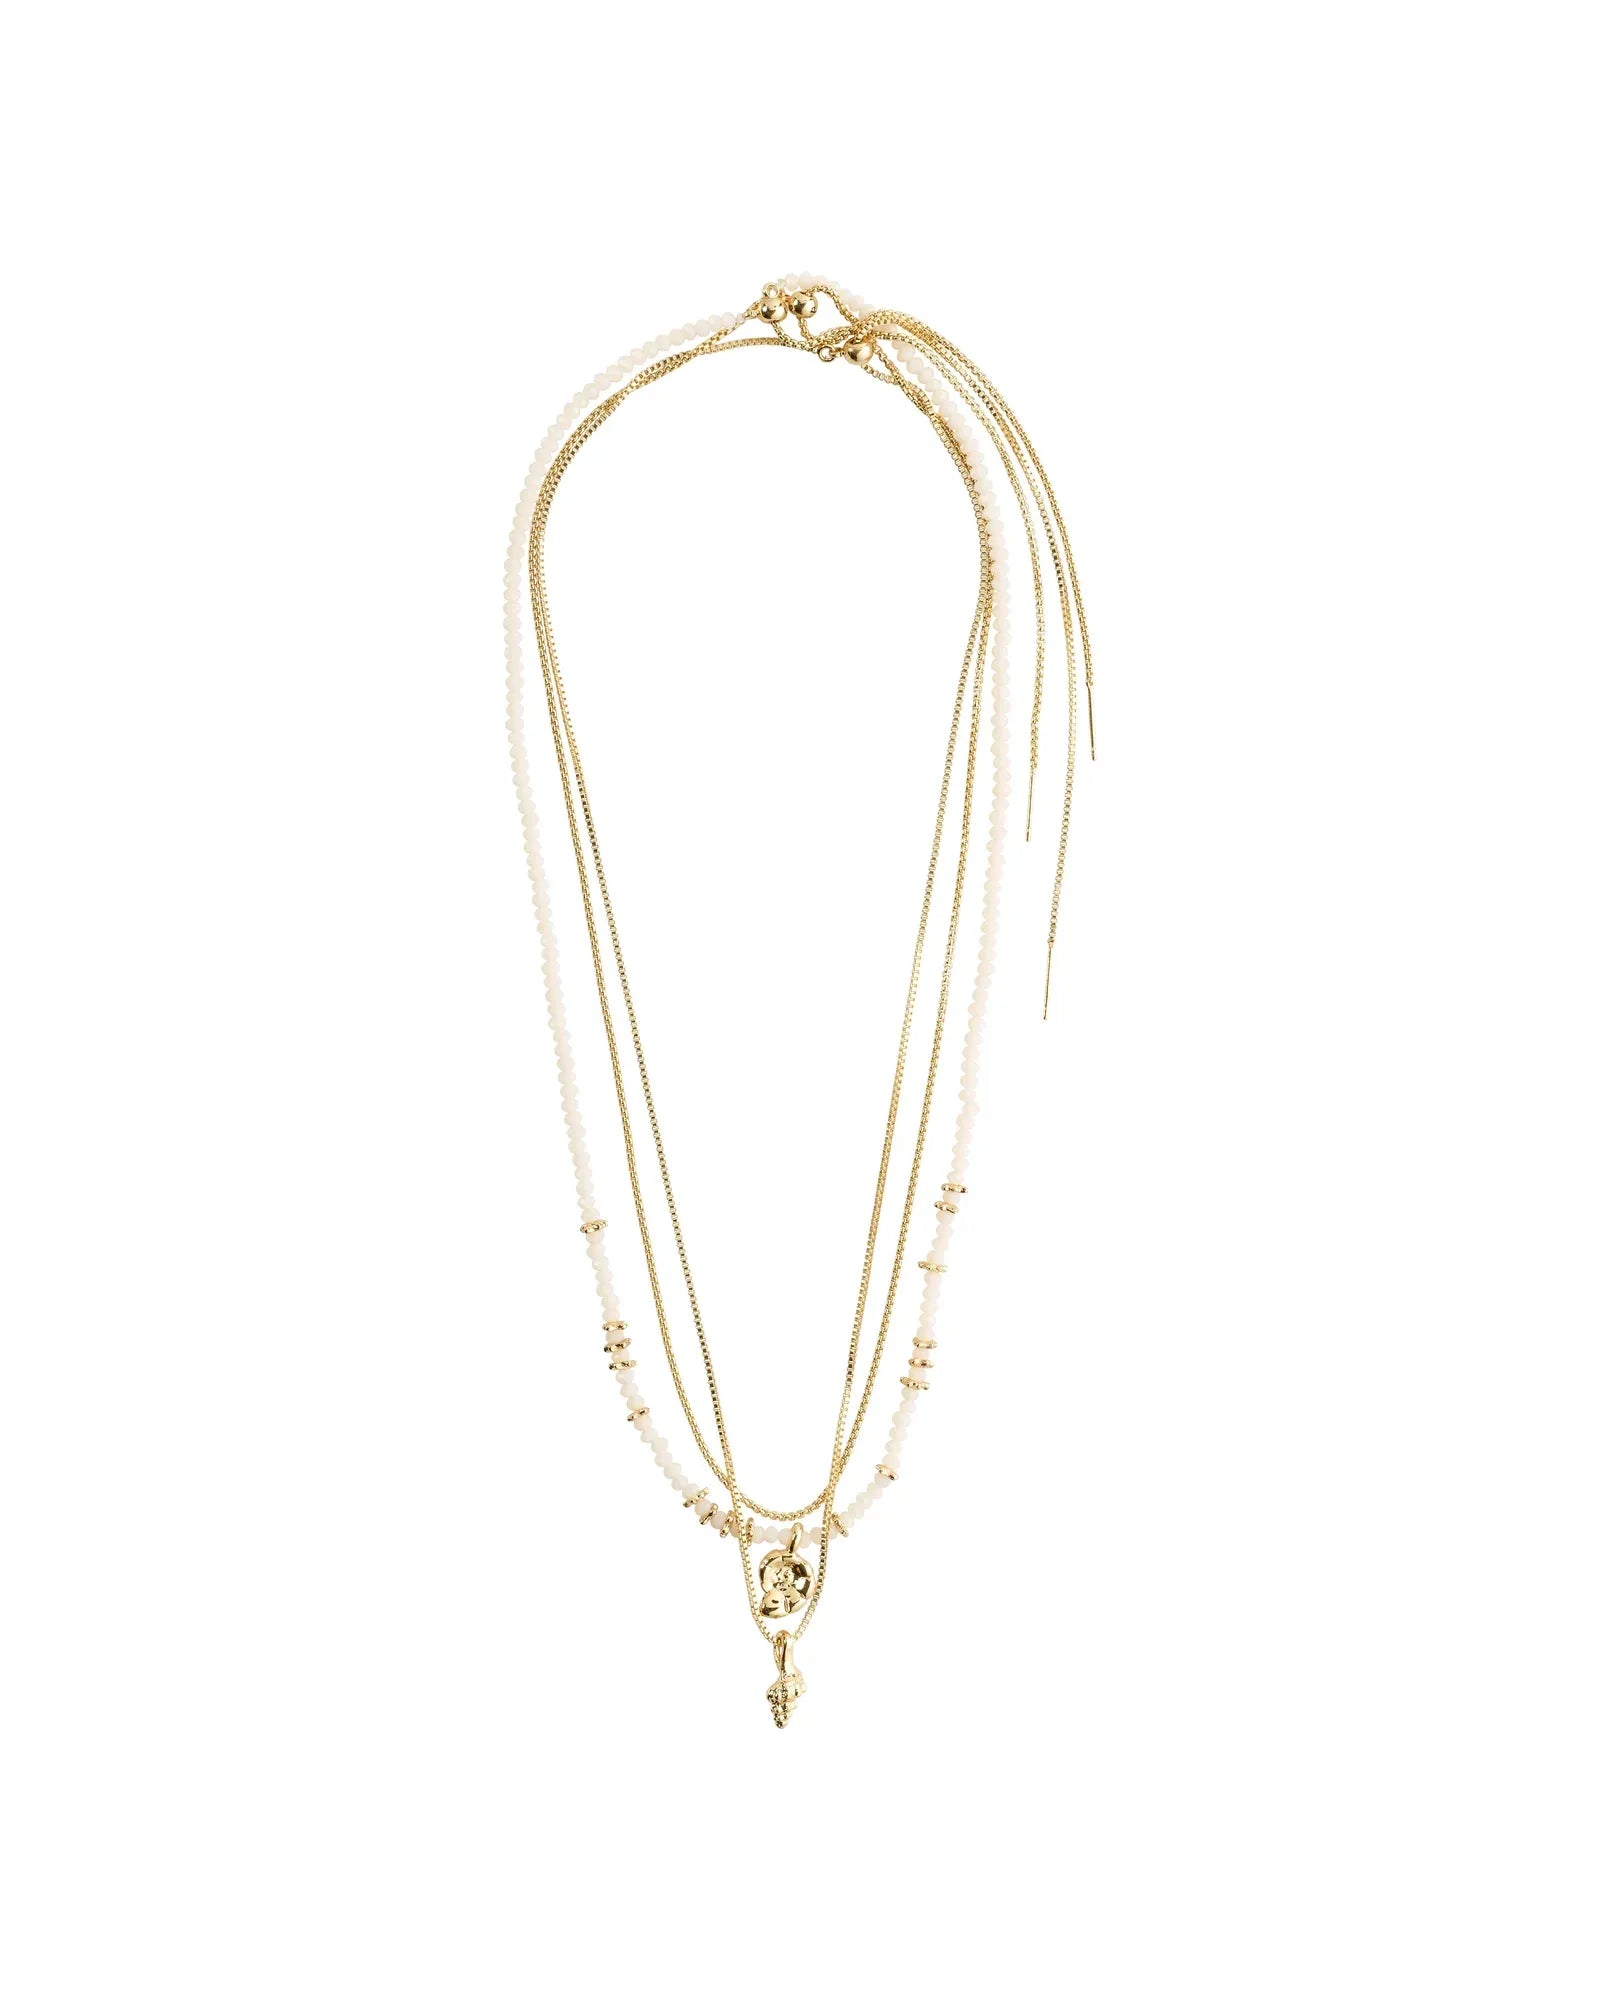 SEA Necklace 3-in-1 - White/Gold Plated